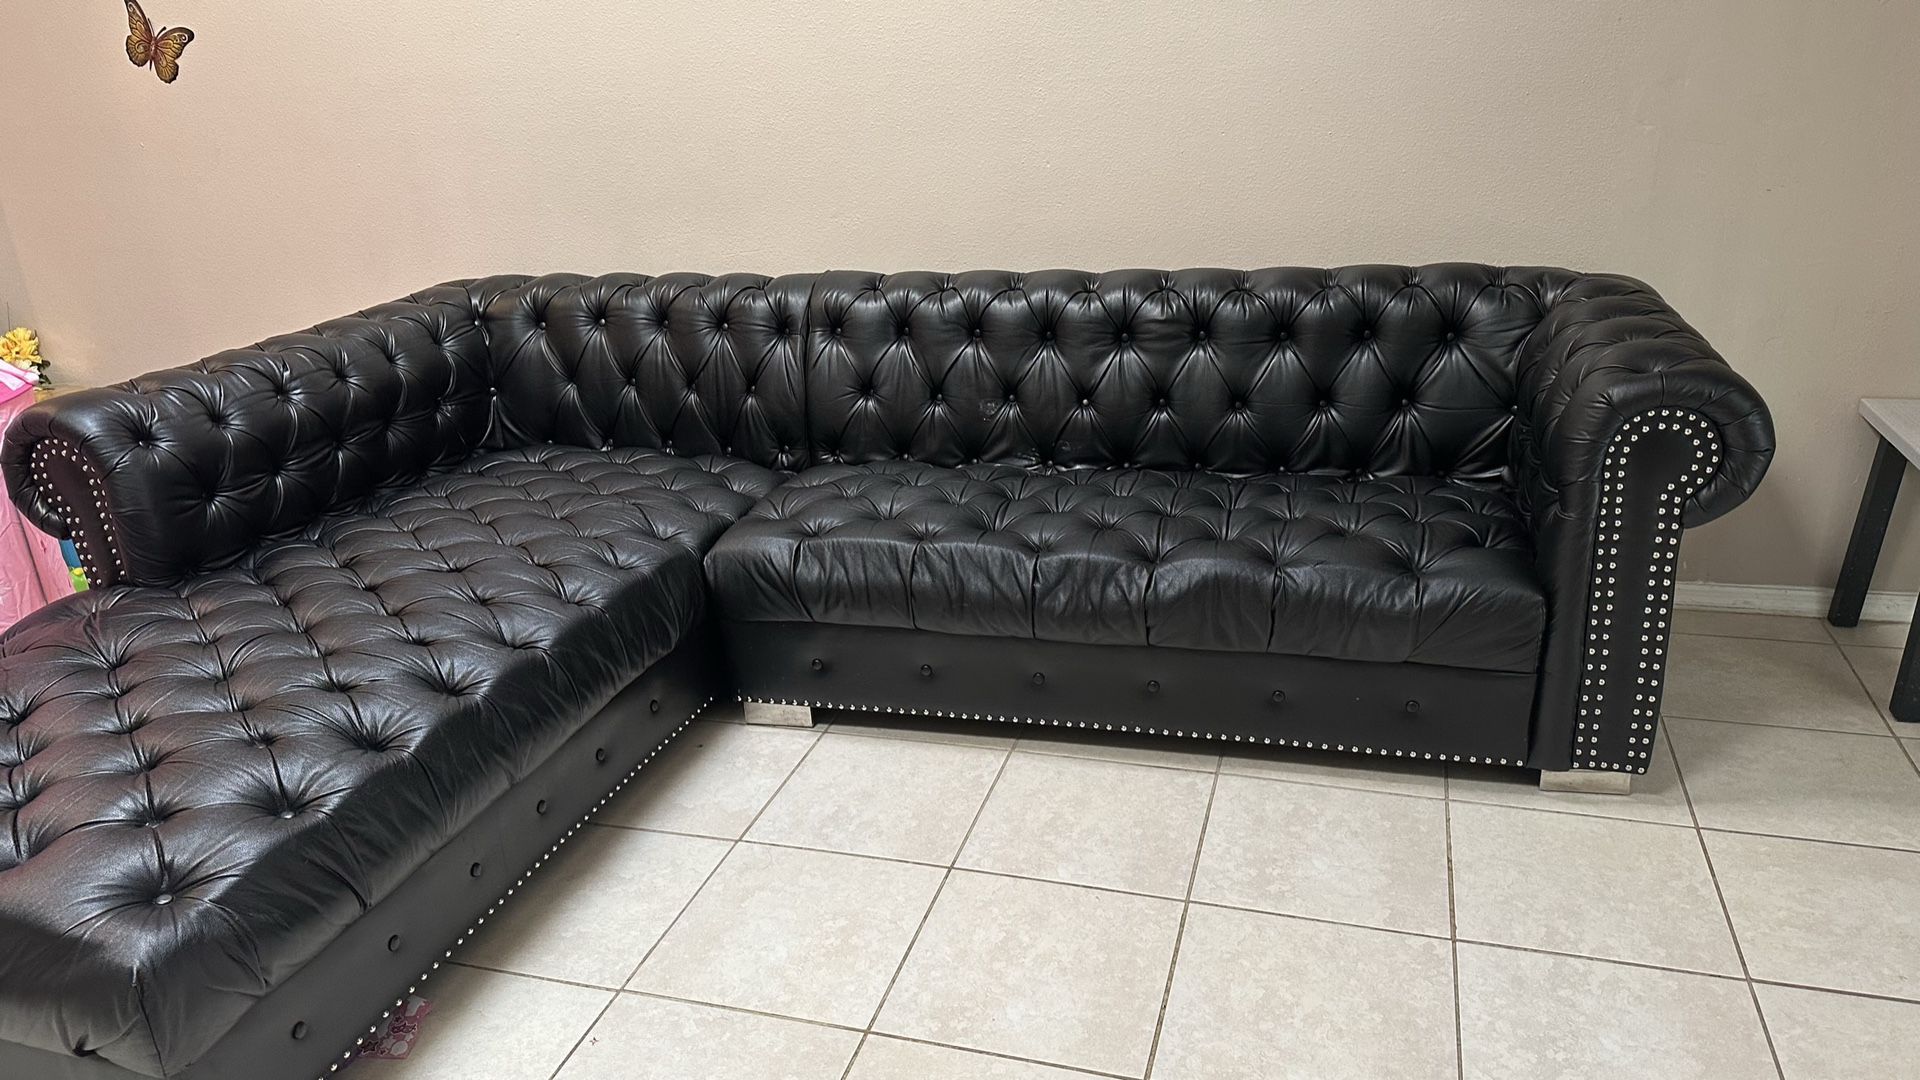 Black Leather Couch 600 Dollars